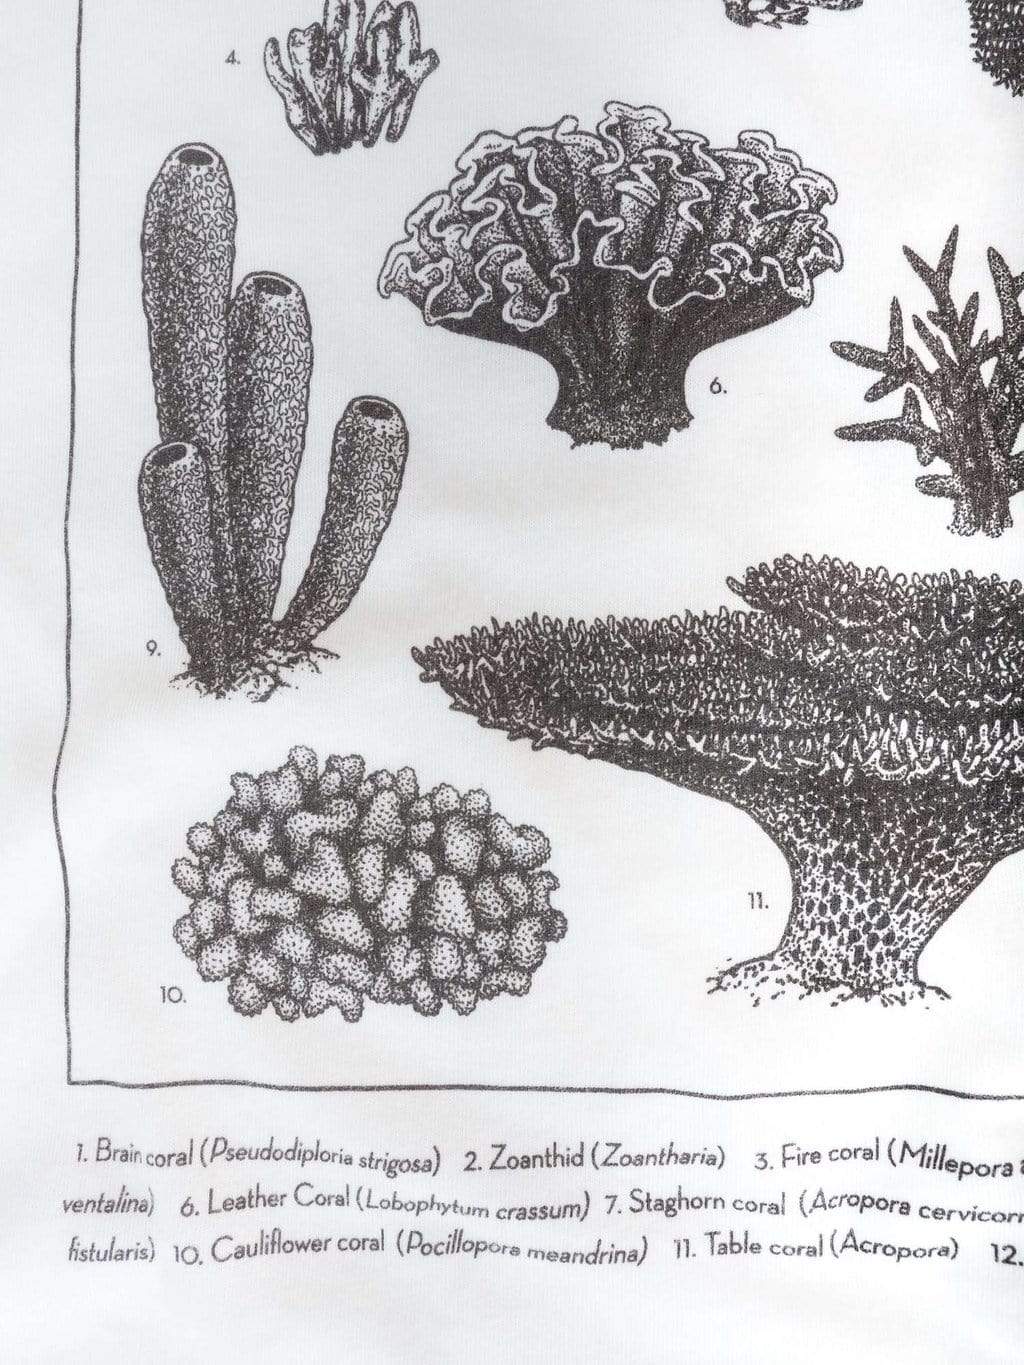 Close up view of the bottom left part of the coral identification graphic